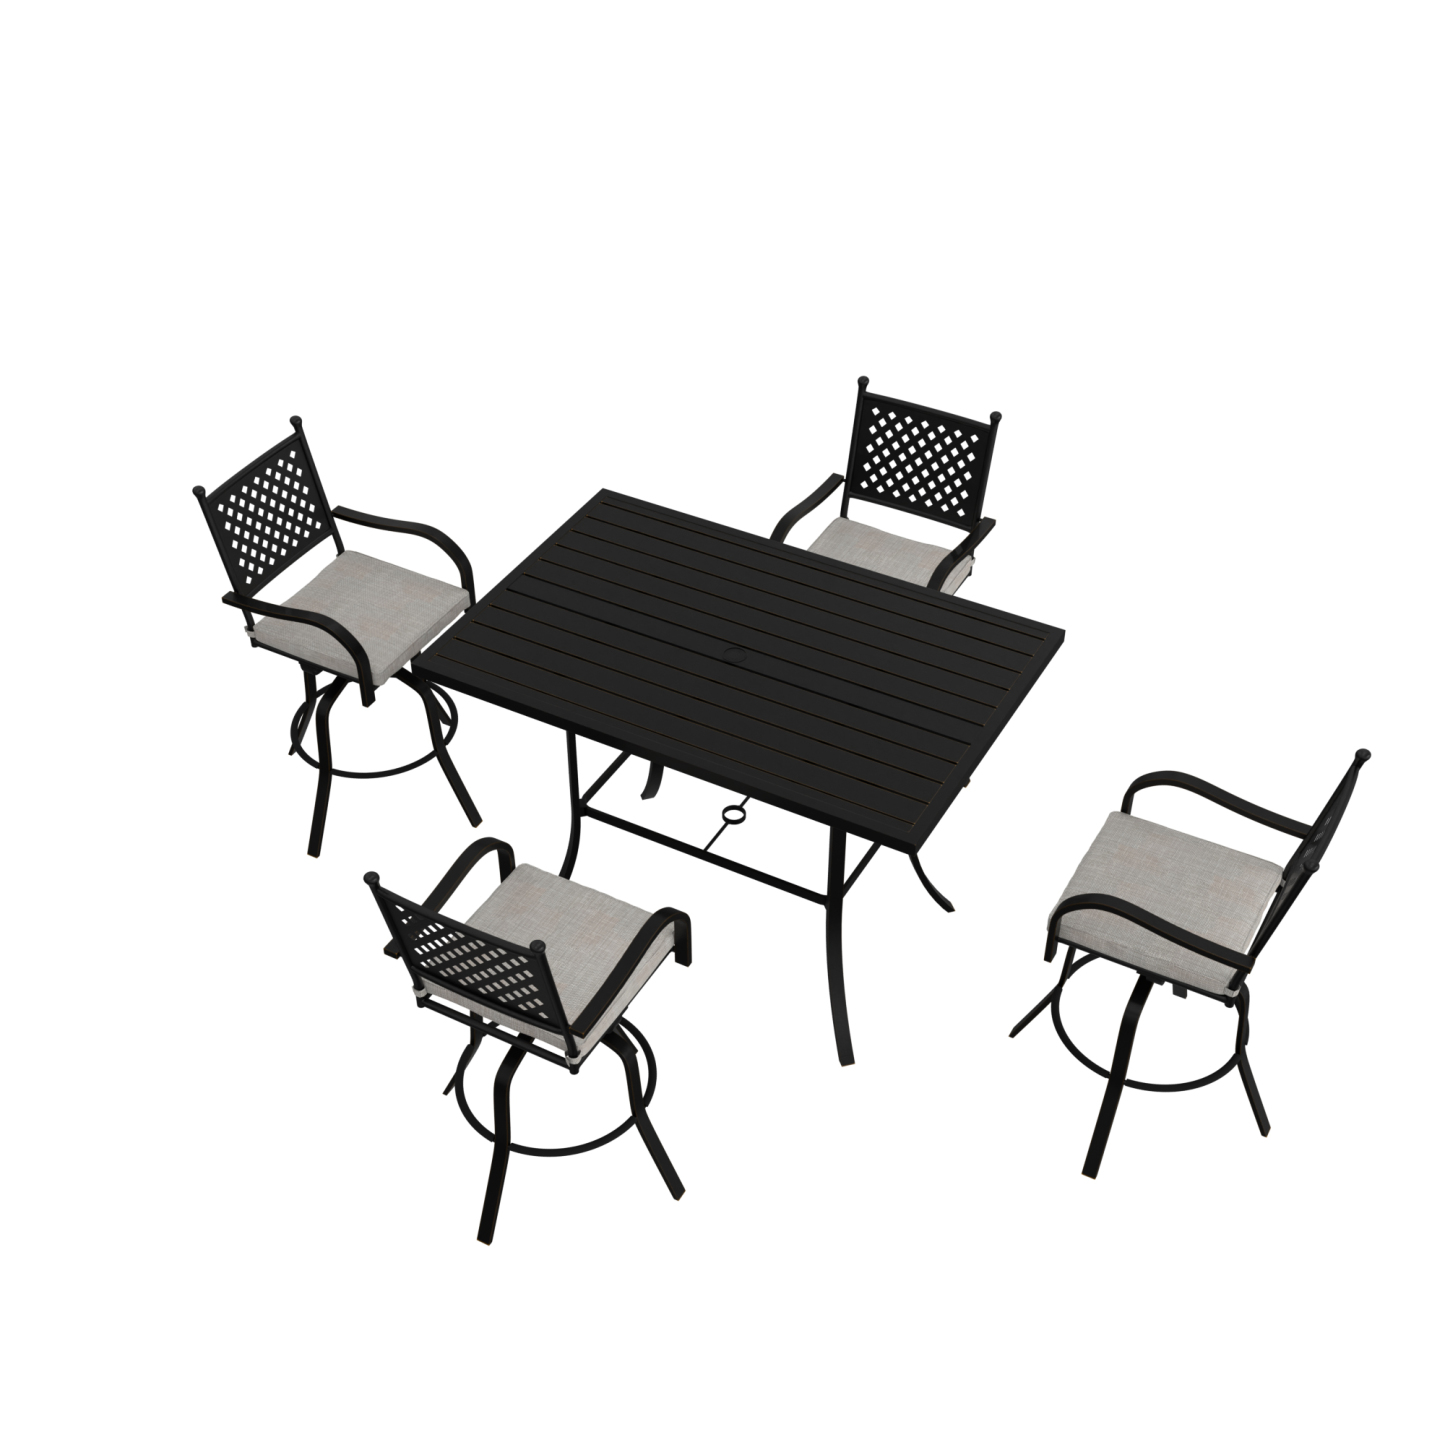 Mondawe 5-Piece Black Cast Aluminum Swivel Chairs and Table Dining Set for Outdoor Patio-Mondawe